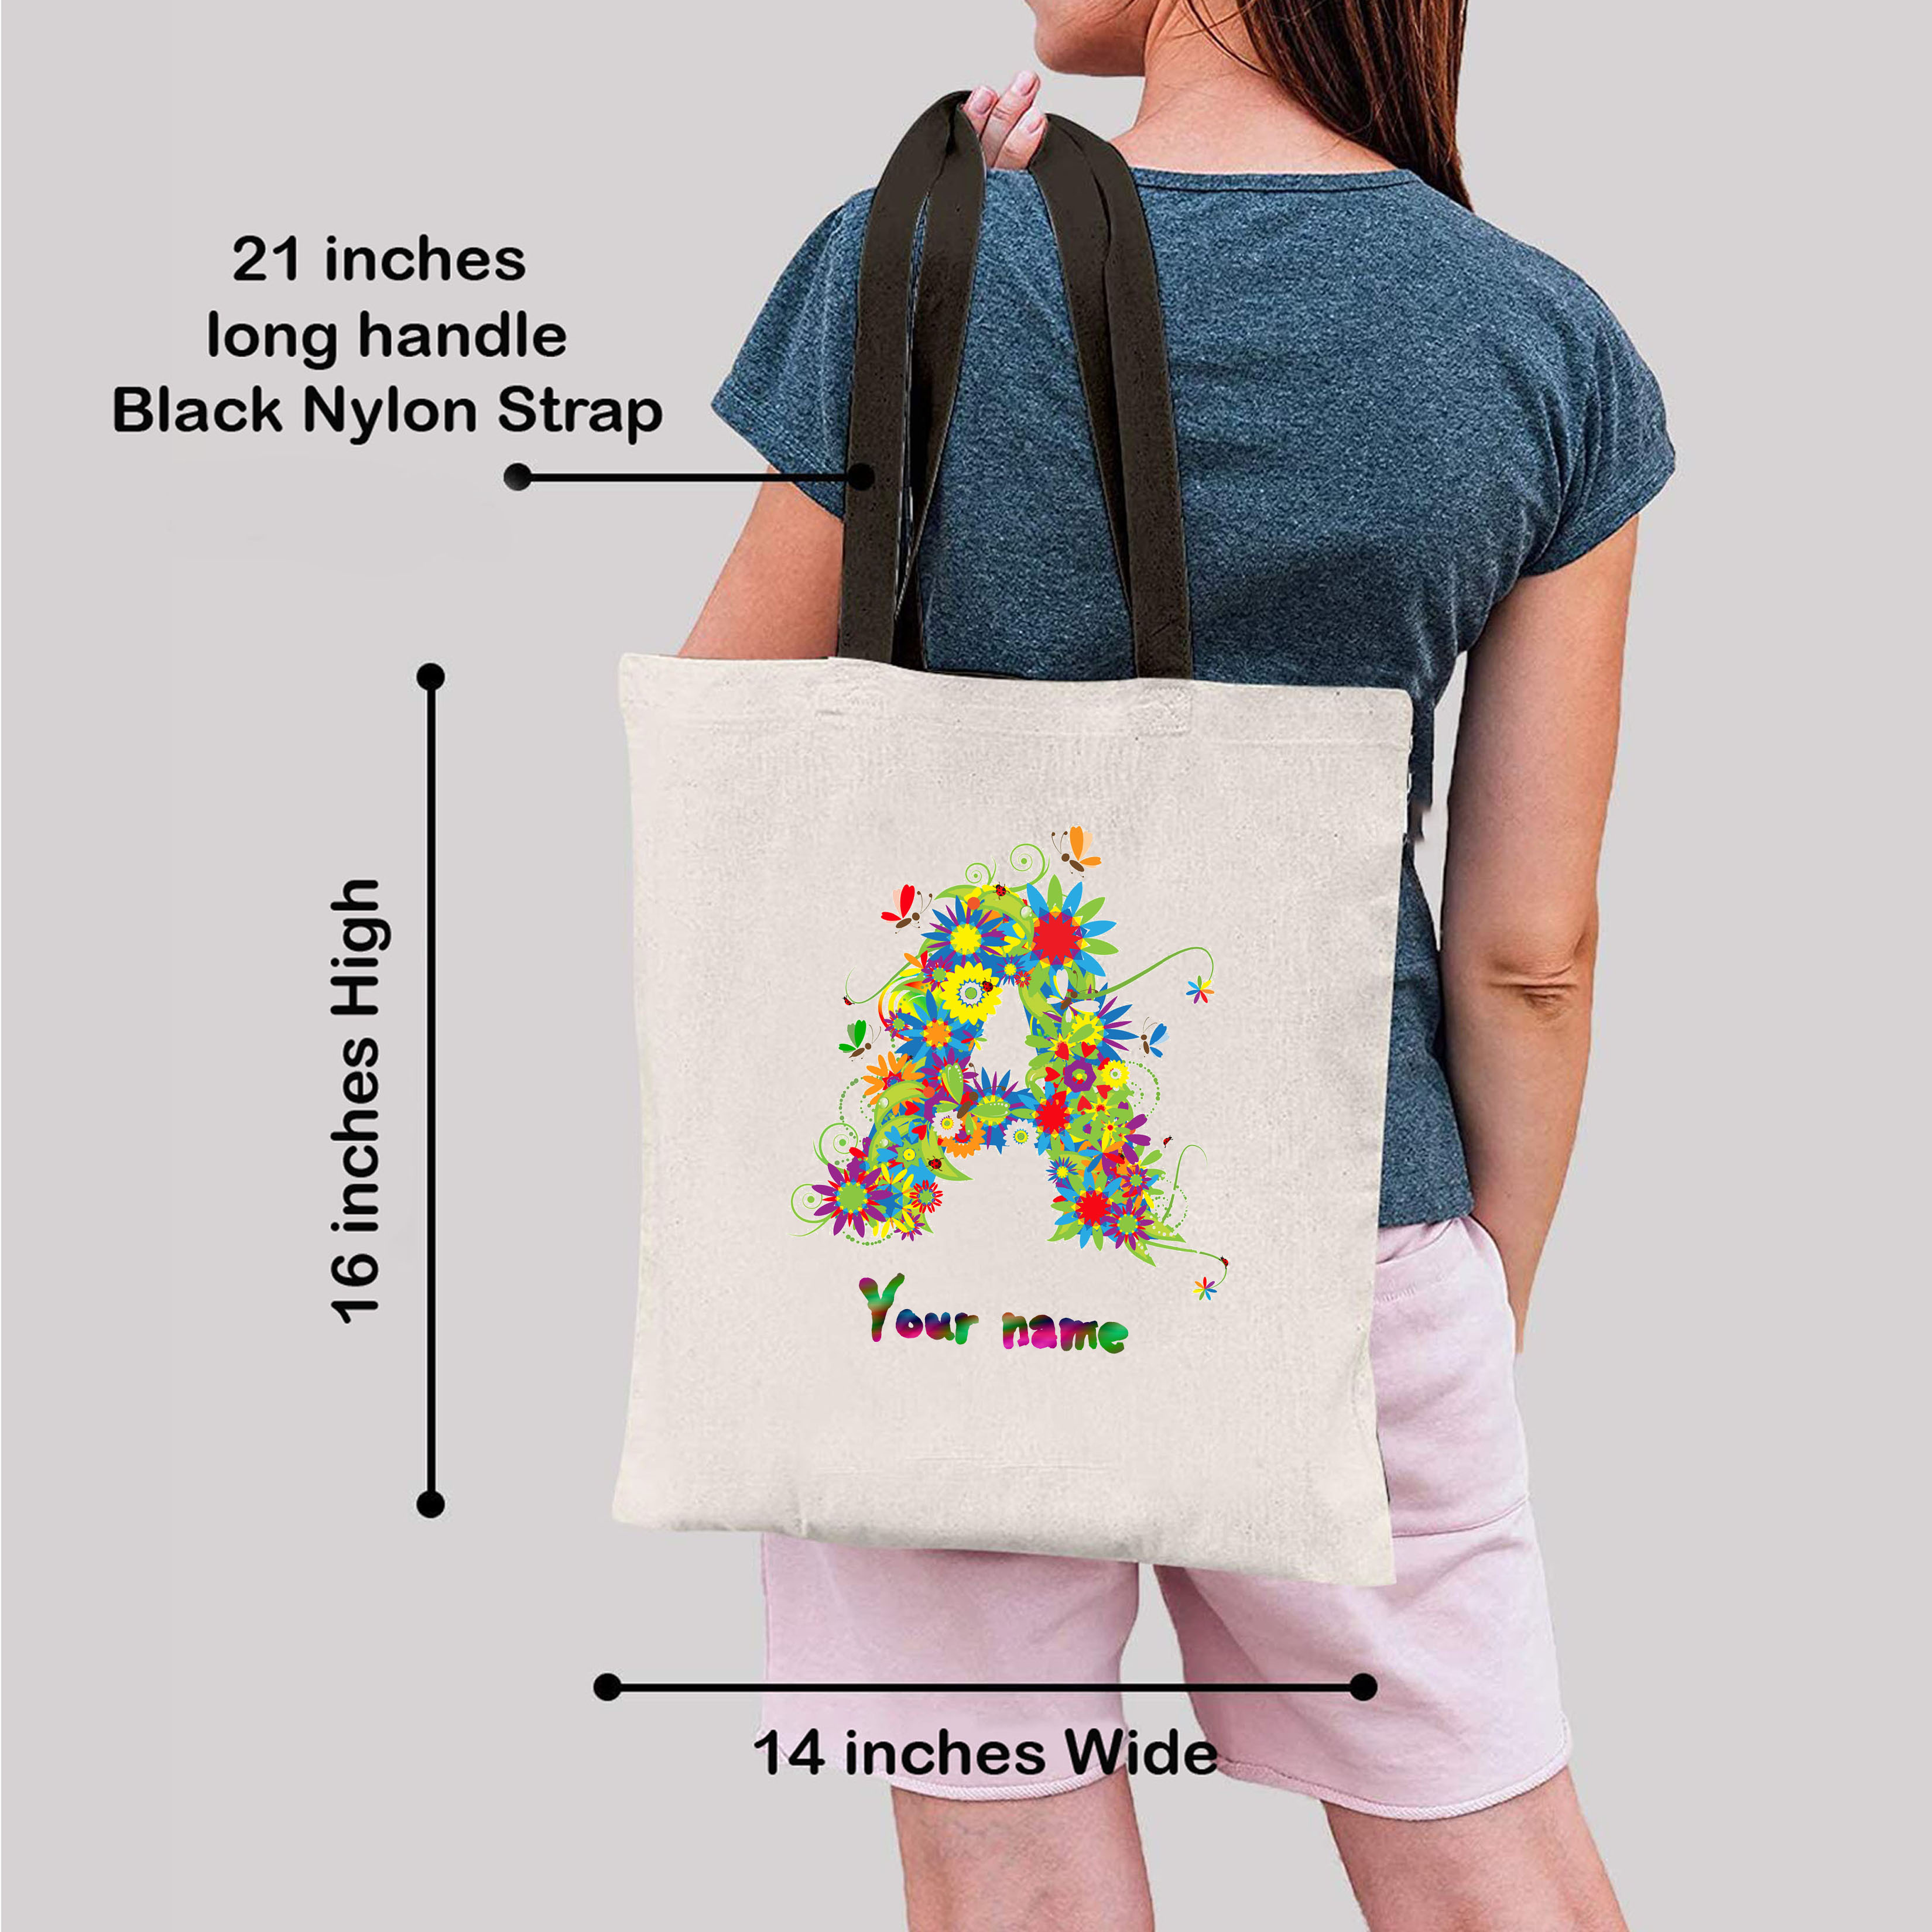 Black Loop Handle Personalized Canvas Tote Bag, Size/Dimension: 12 X 10 X 5  Inch